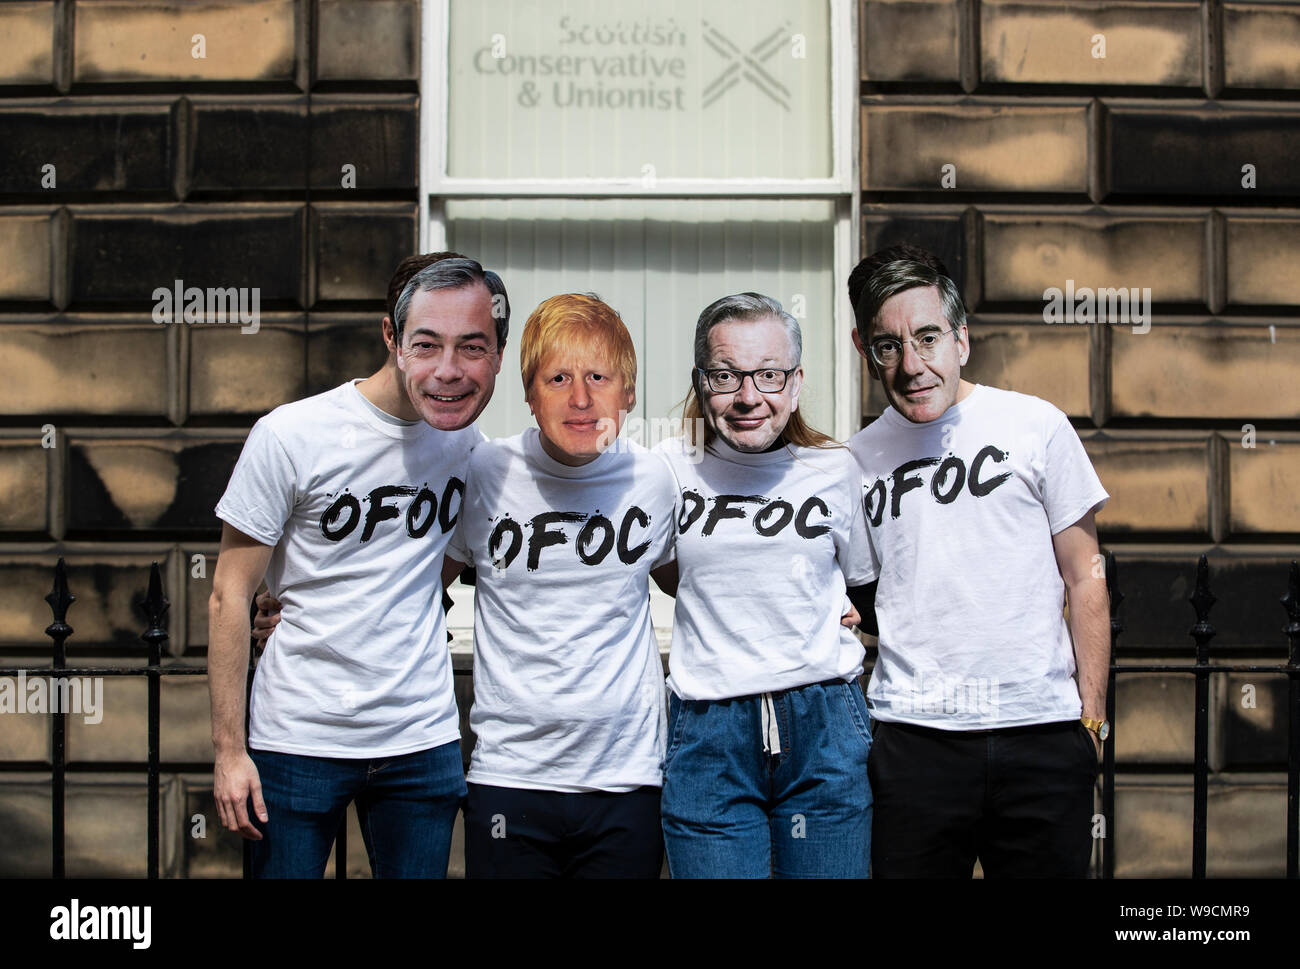 Young activists from Our Future, Our Choice held a protest outside the Scottish Conservative's HQ in Edinburgh to warn that a no-deal Brexit threatens the future of the Union. Stock Photo